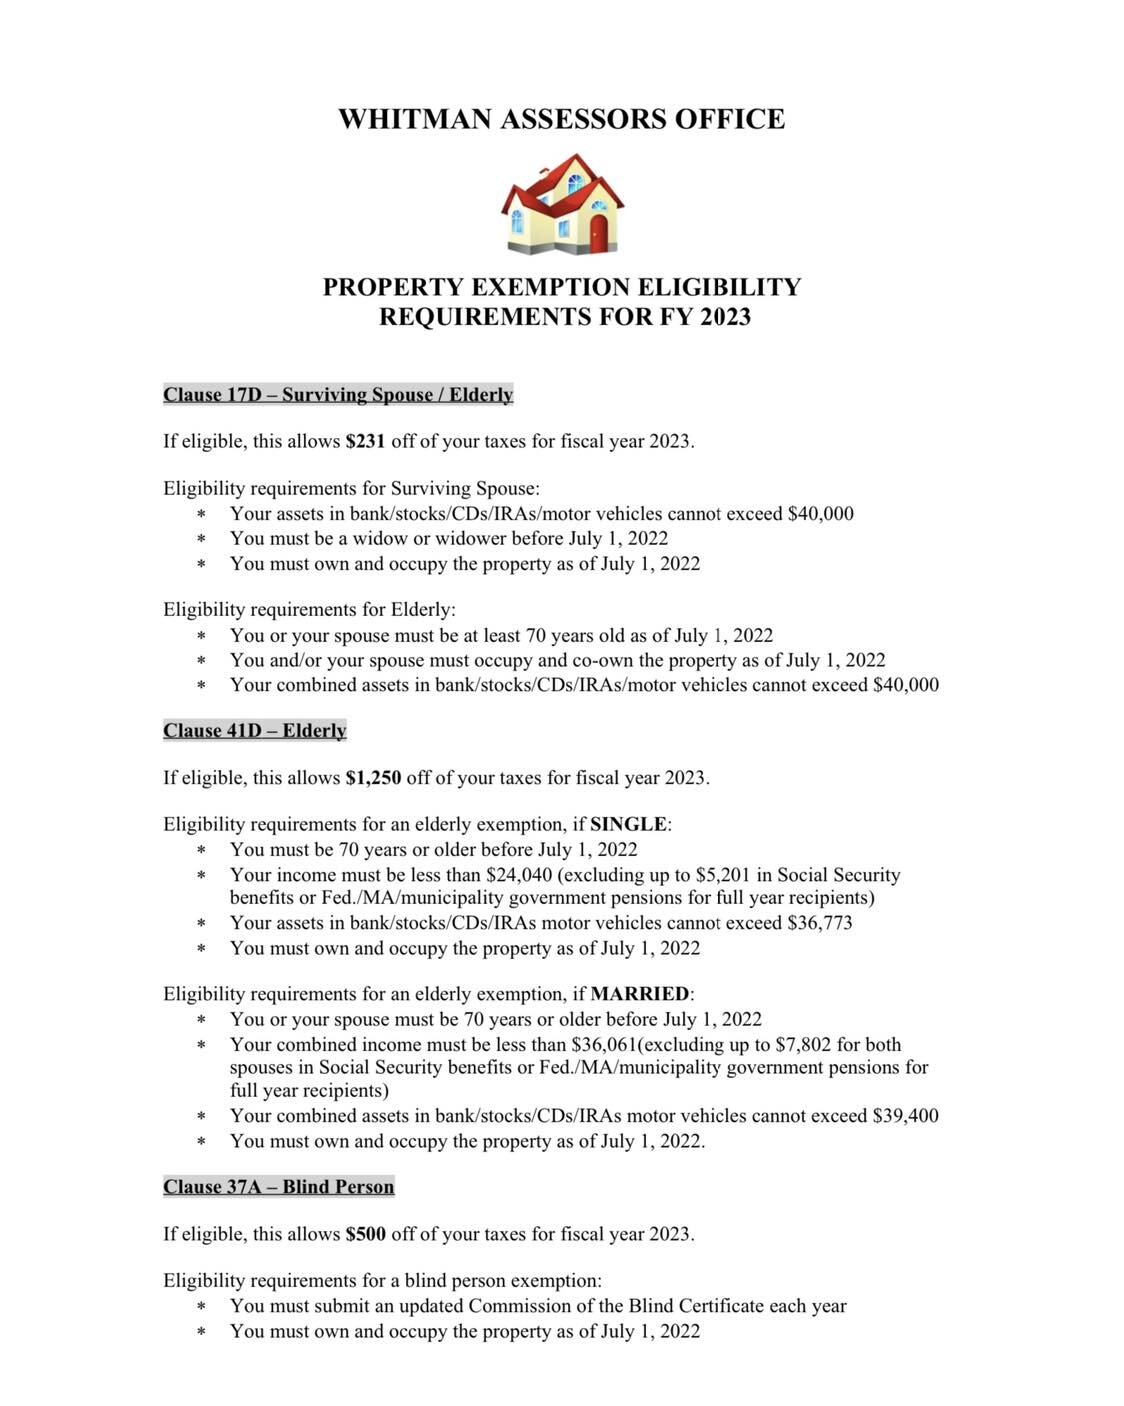 We&rsquo;re coming up on 3 months after the real estate tax bills were mailed, so the time to apply for an exemption is running out. Our Assessors Office put together this summary, if you think you might be eligible now is the time to apply!! The app